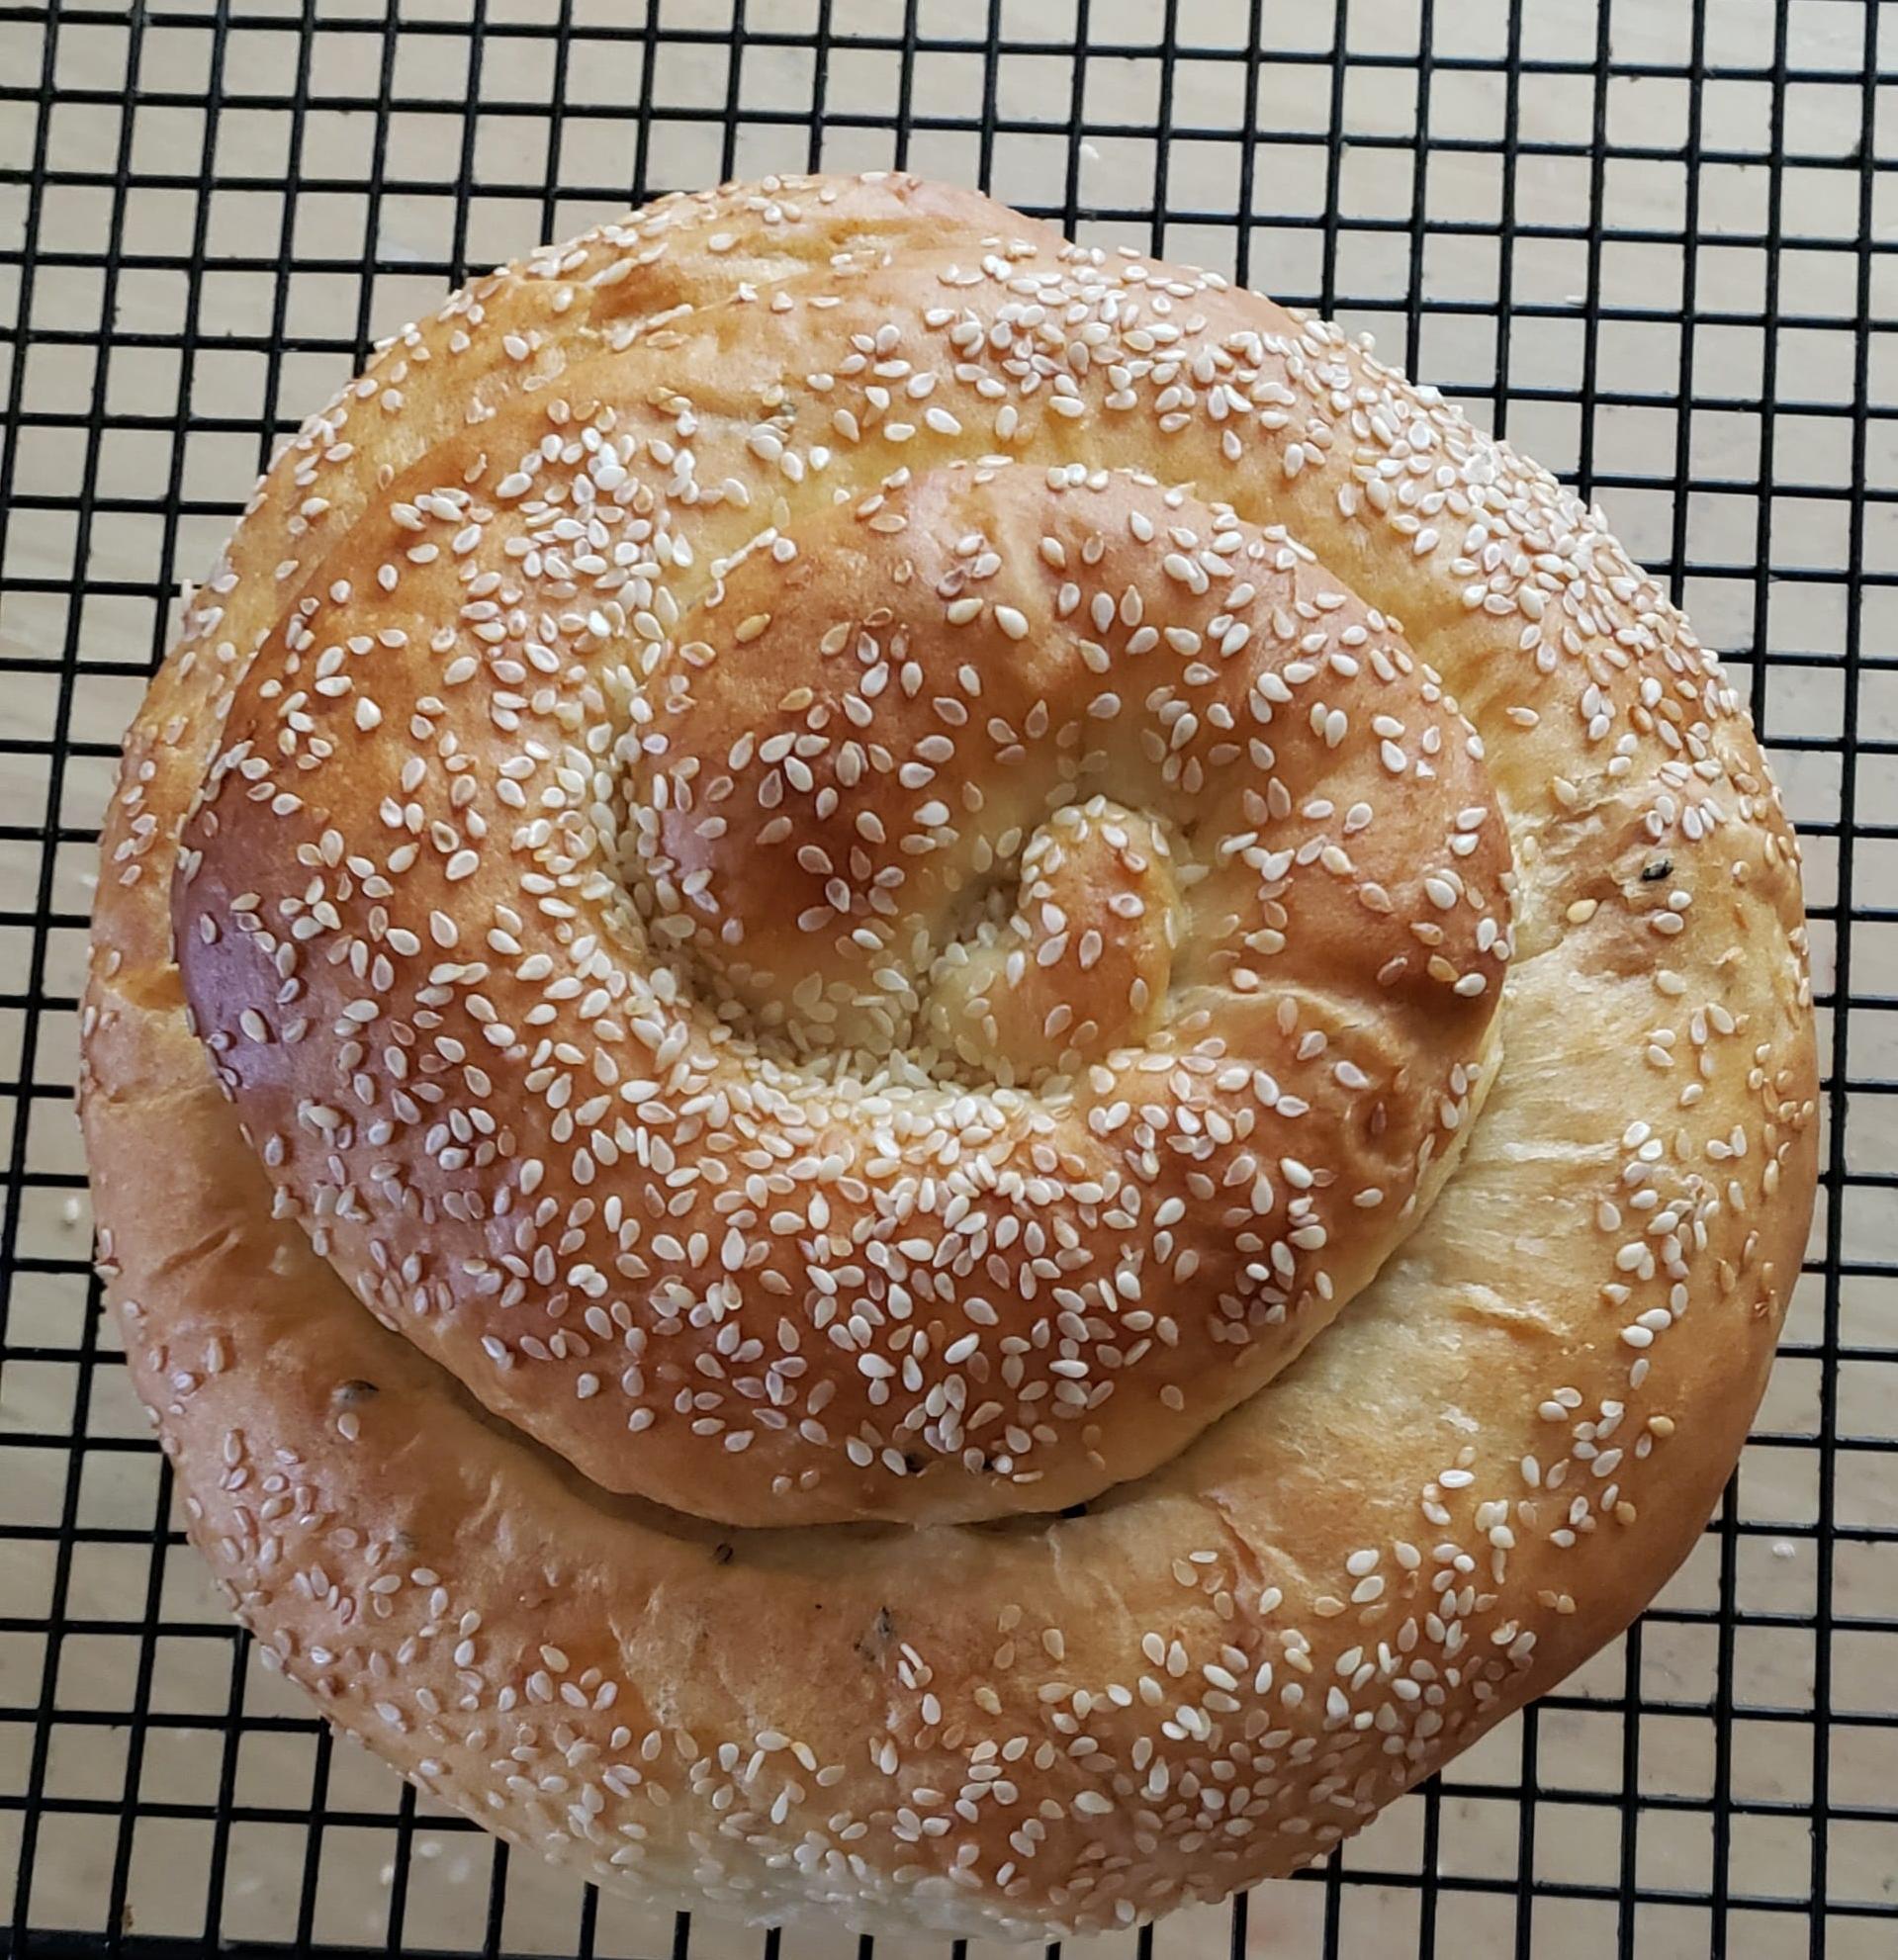 Delicious Armenian Bread Recipe for Your Next Meal